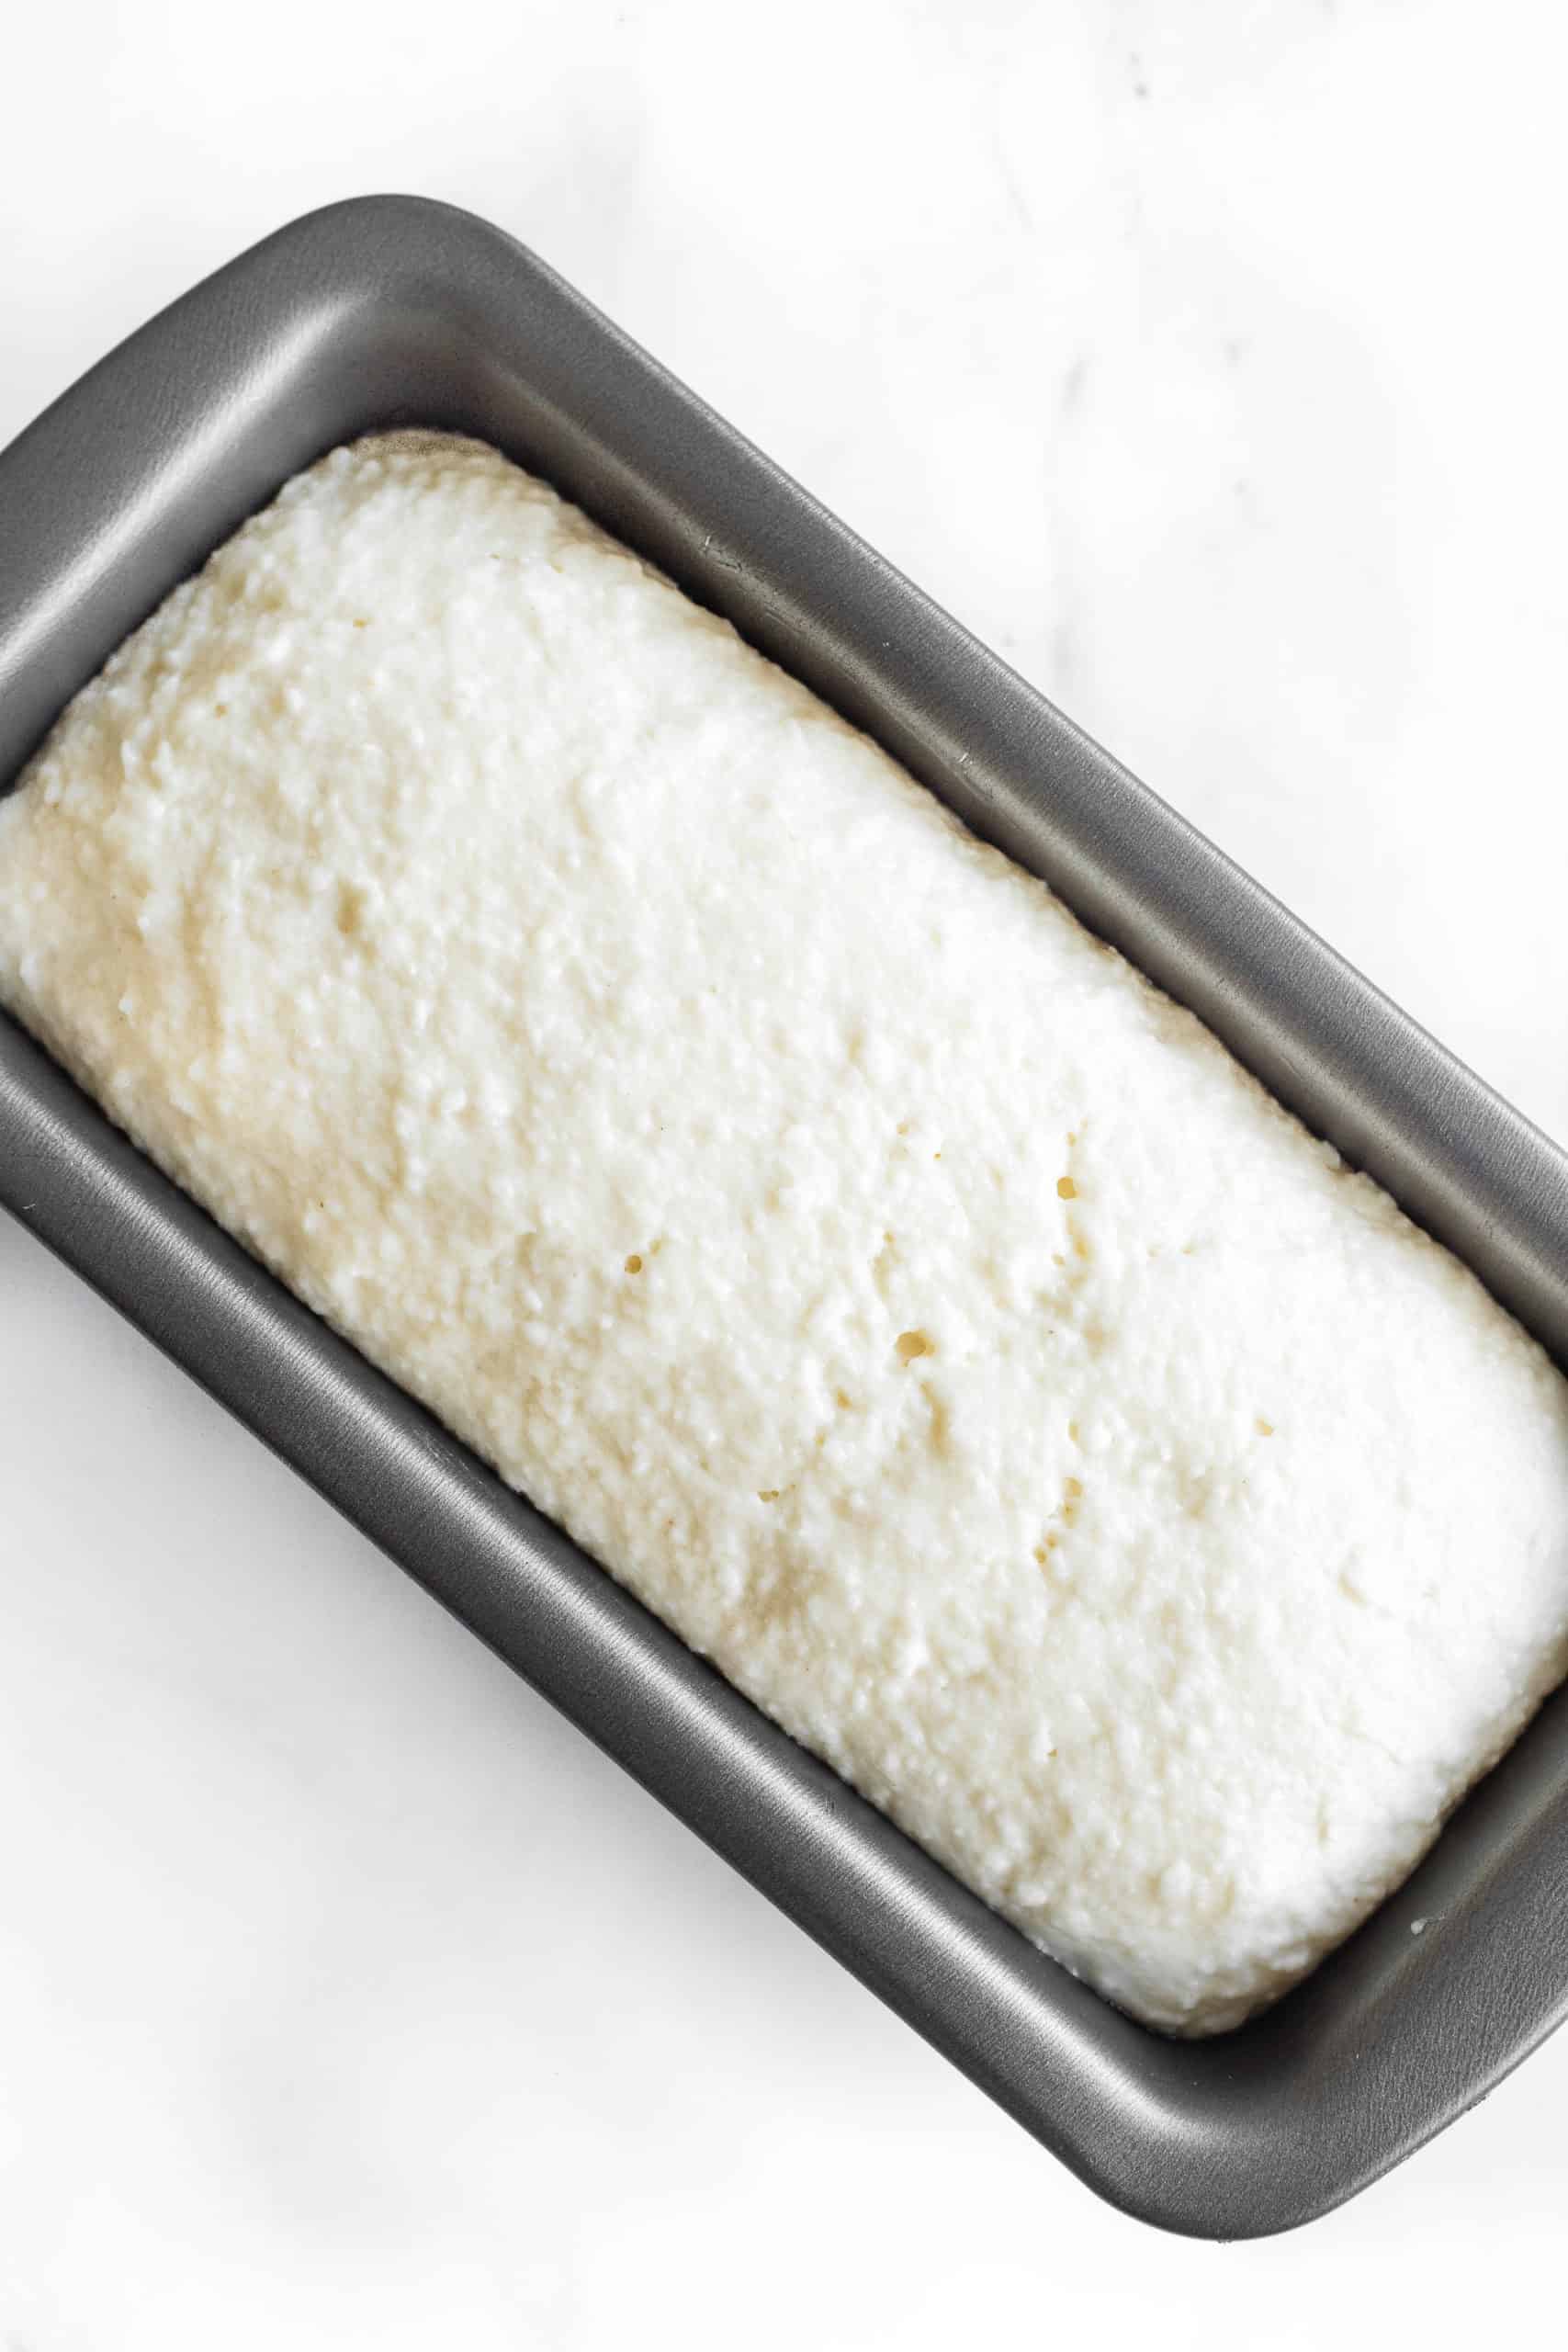 Gluten-free bread dough in a loaf pan after rising and doubling in size. 